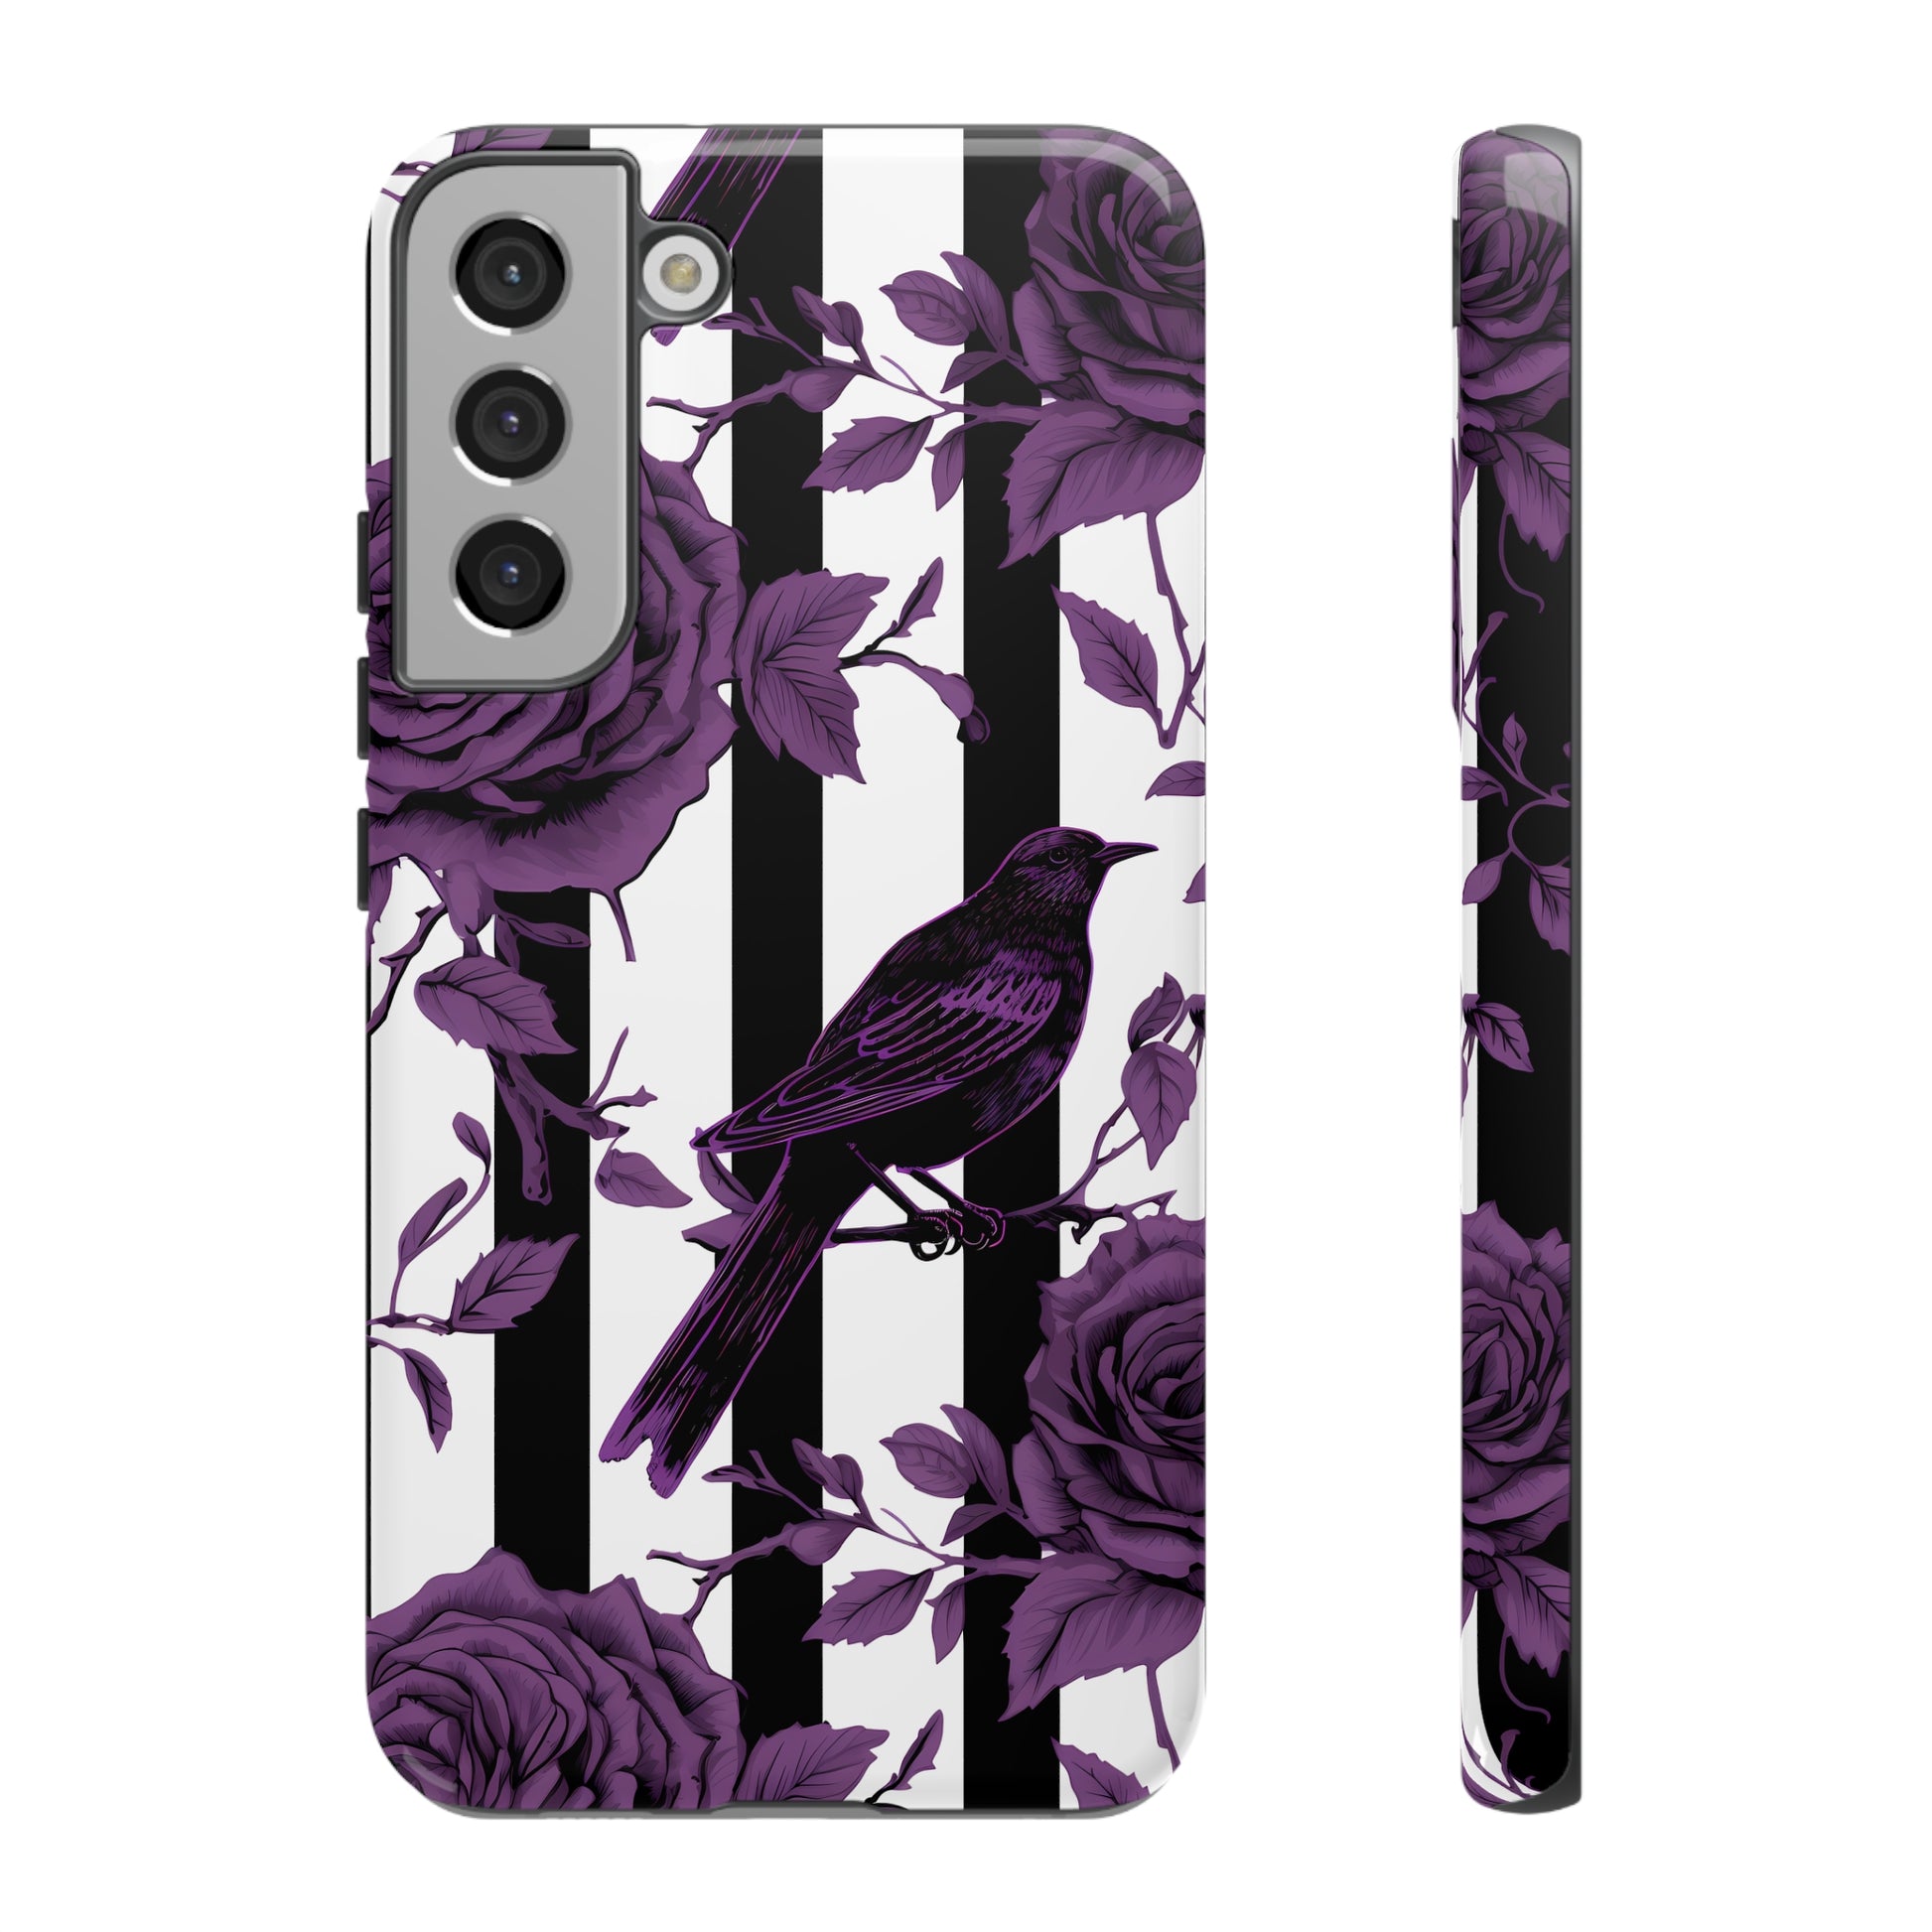 Striped Crows and Roses Tough Cases for iPhone Samsung Google PhonesPhone CaseVTZdesignsSamsung Galaxy S22 PlusGlossyAccessoriescrowsGlossy